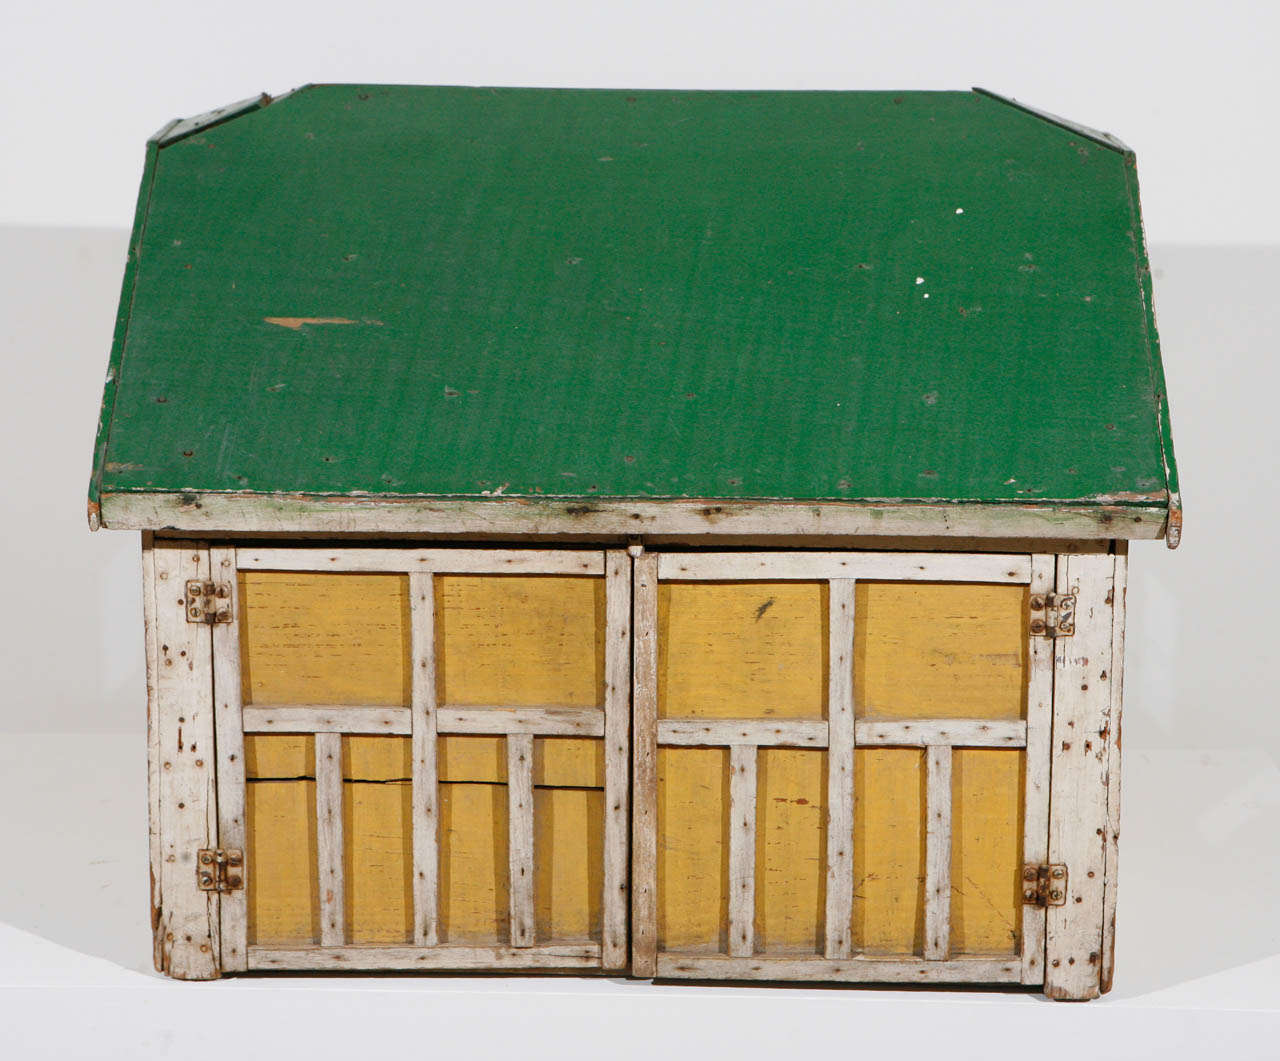 A wooden architectural model in original paint of a garage or barn structure, likely used as a child's play object, with a single door and three windows, along with a highly detailed set of double doors, which open on hinges. Made of scrap wood,